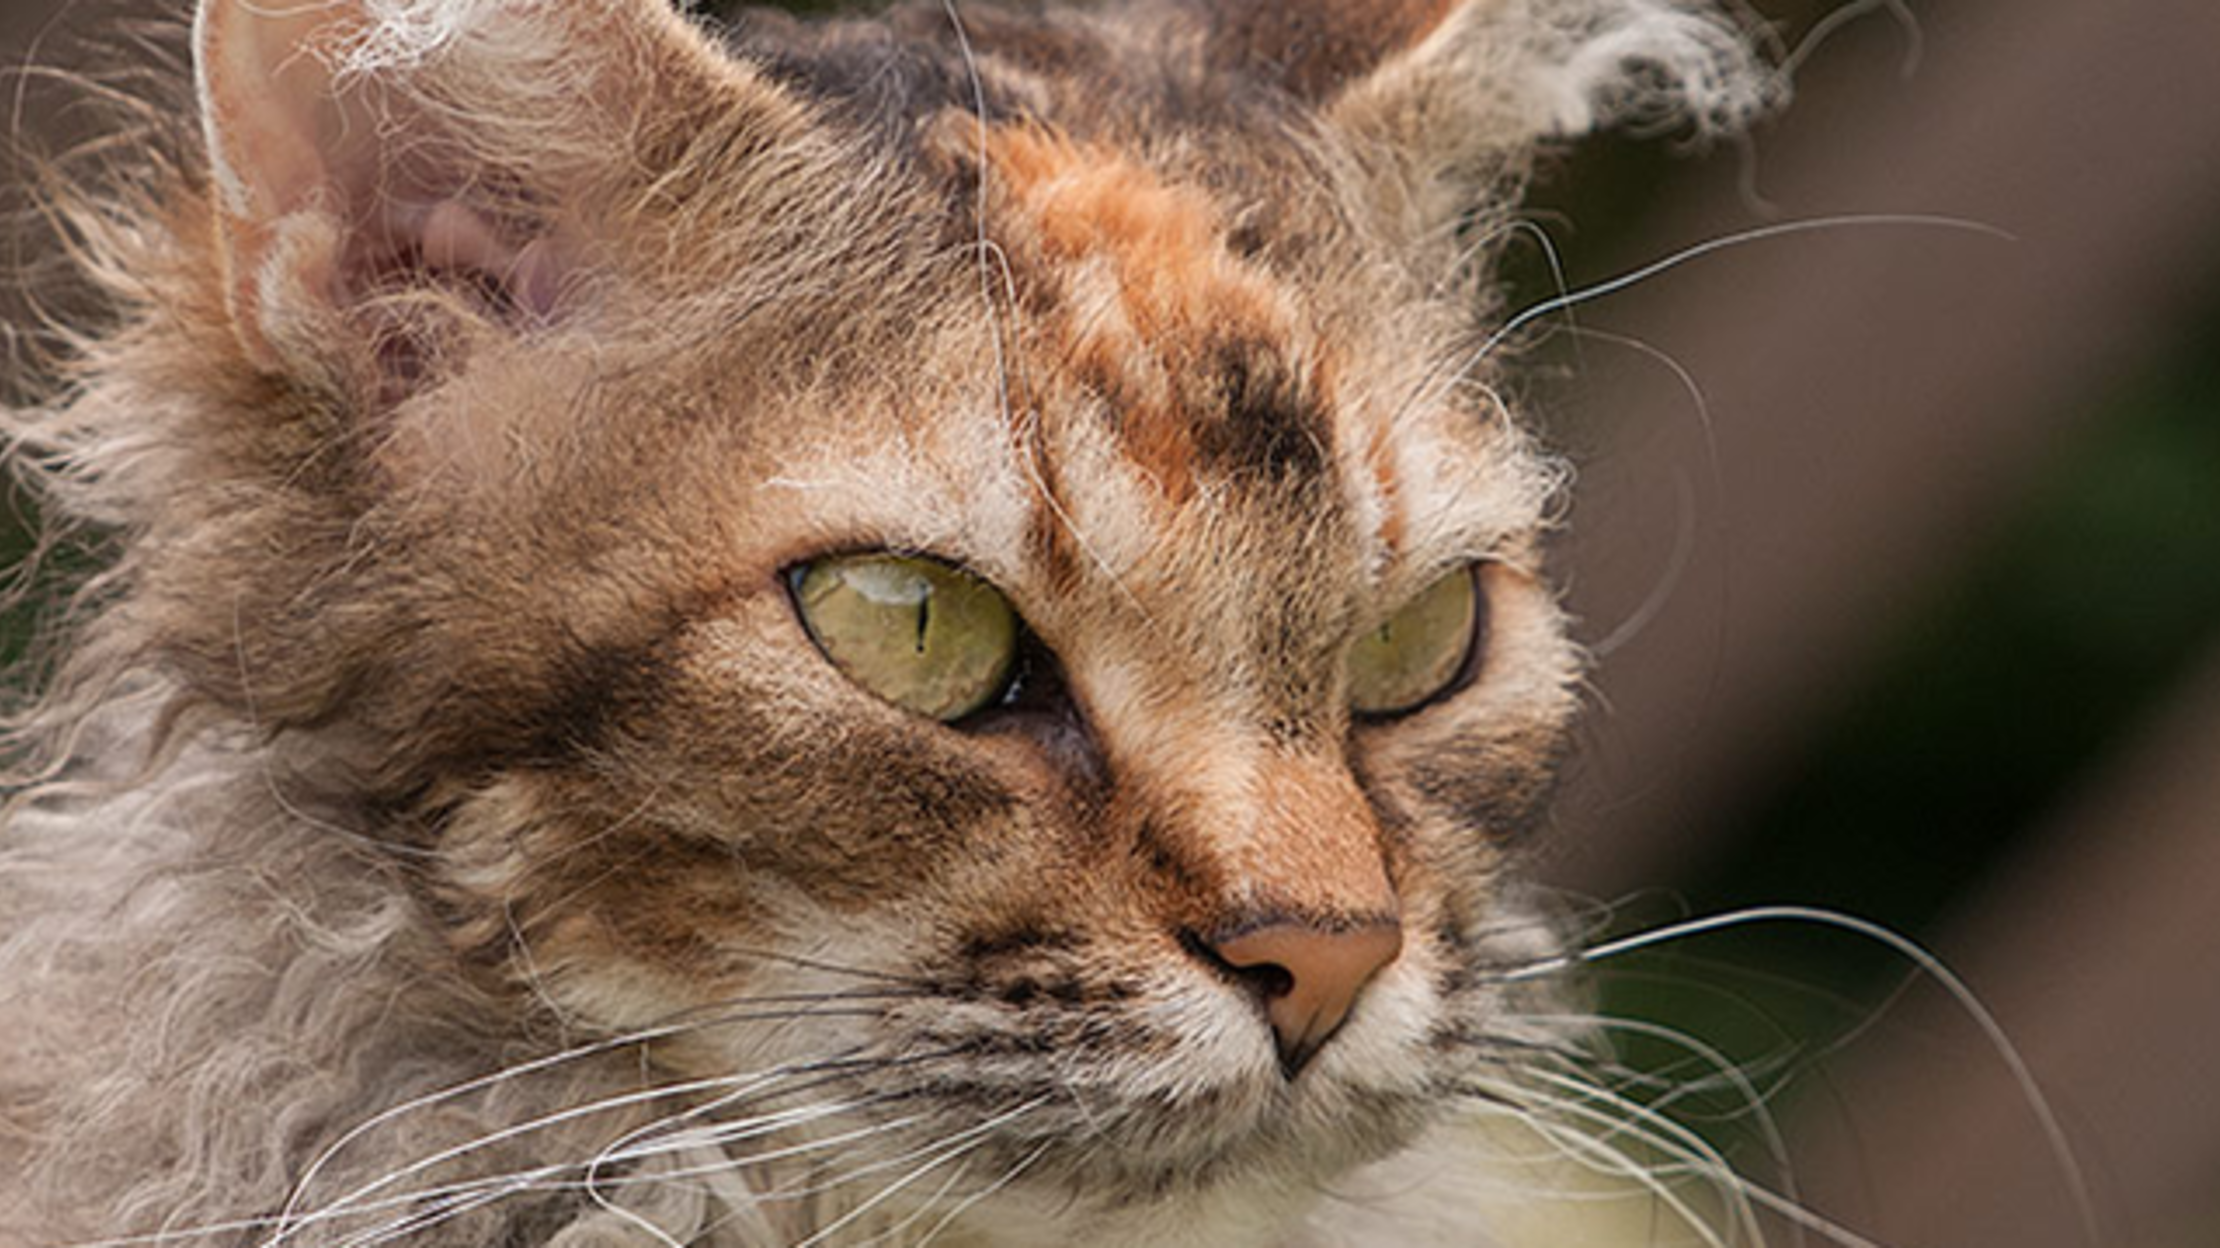 6 Curly Facts About LaPerm Cats | Mental Floss